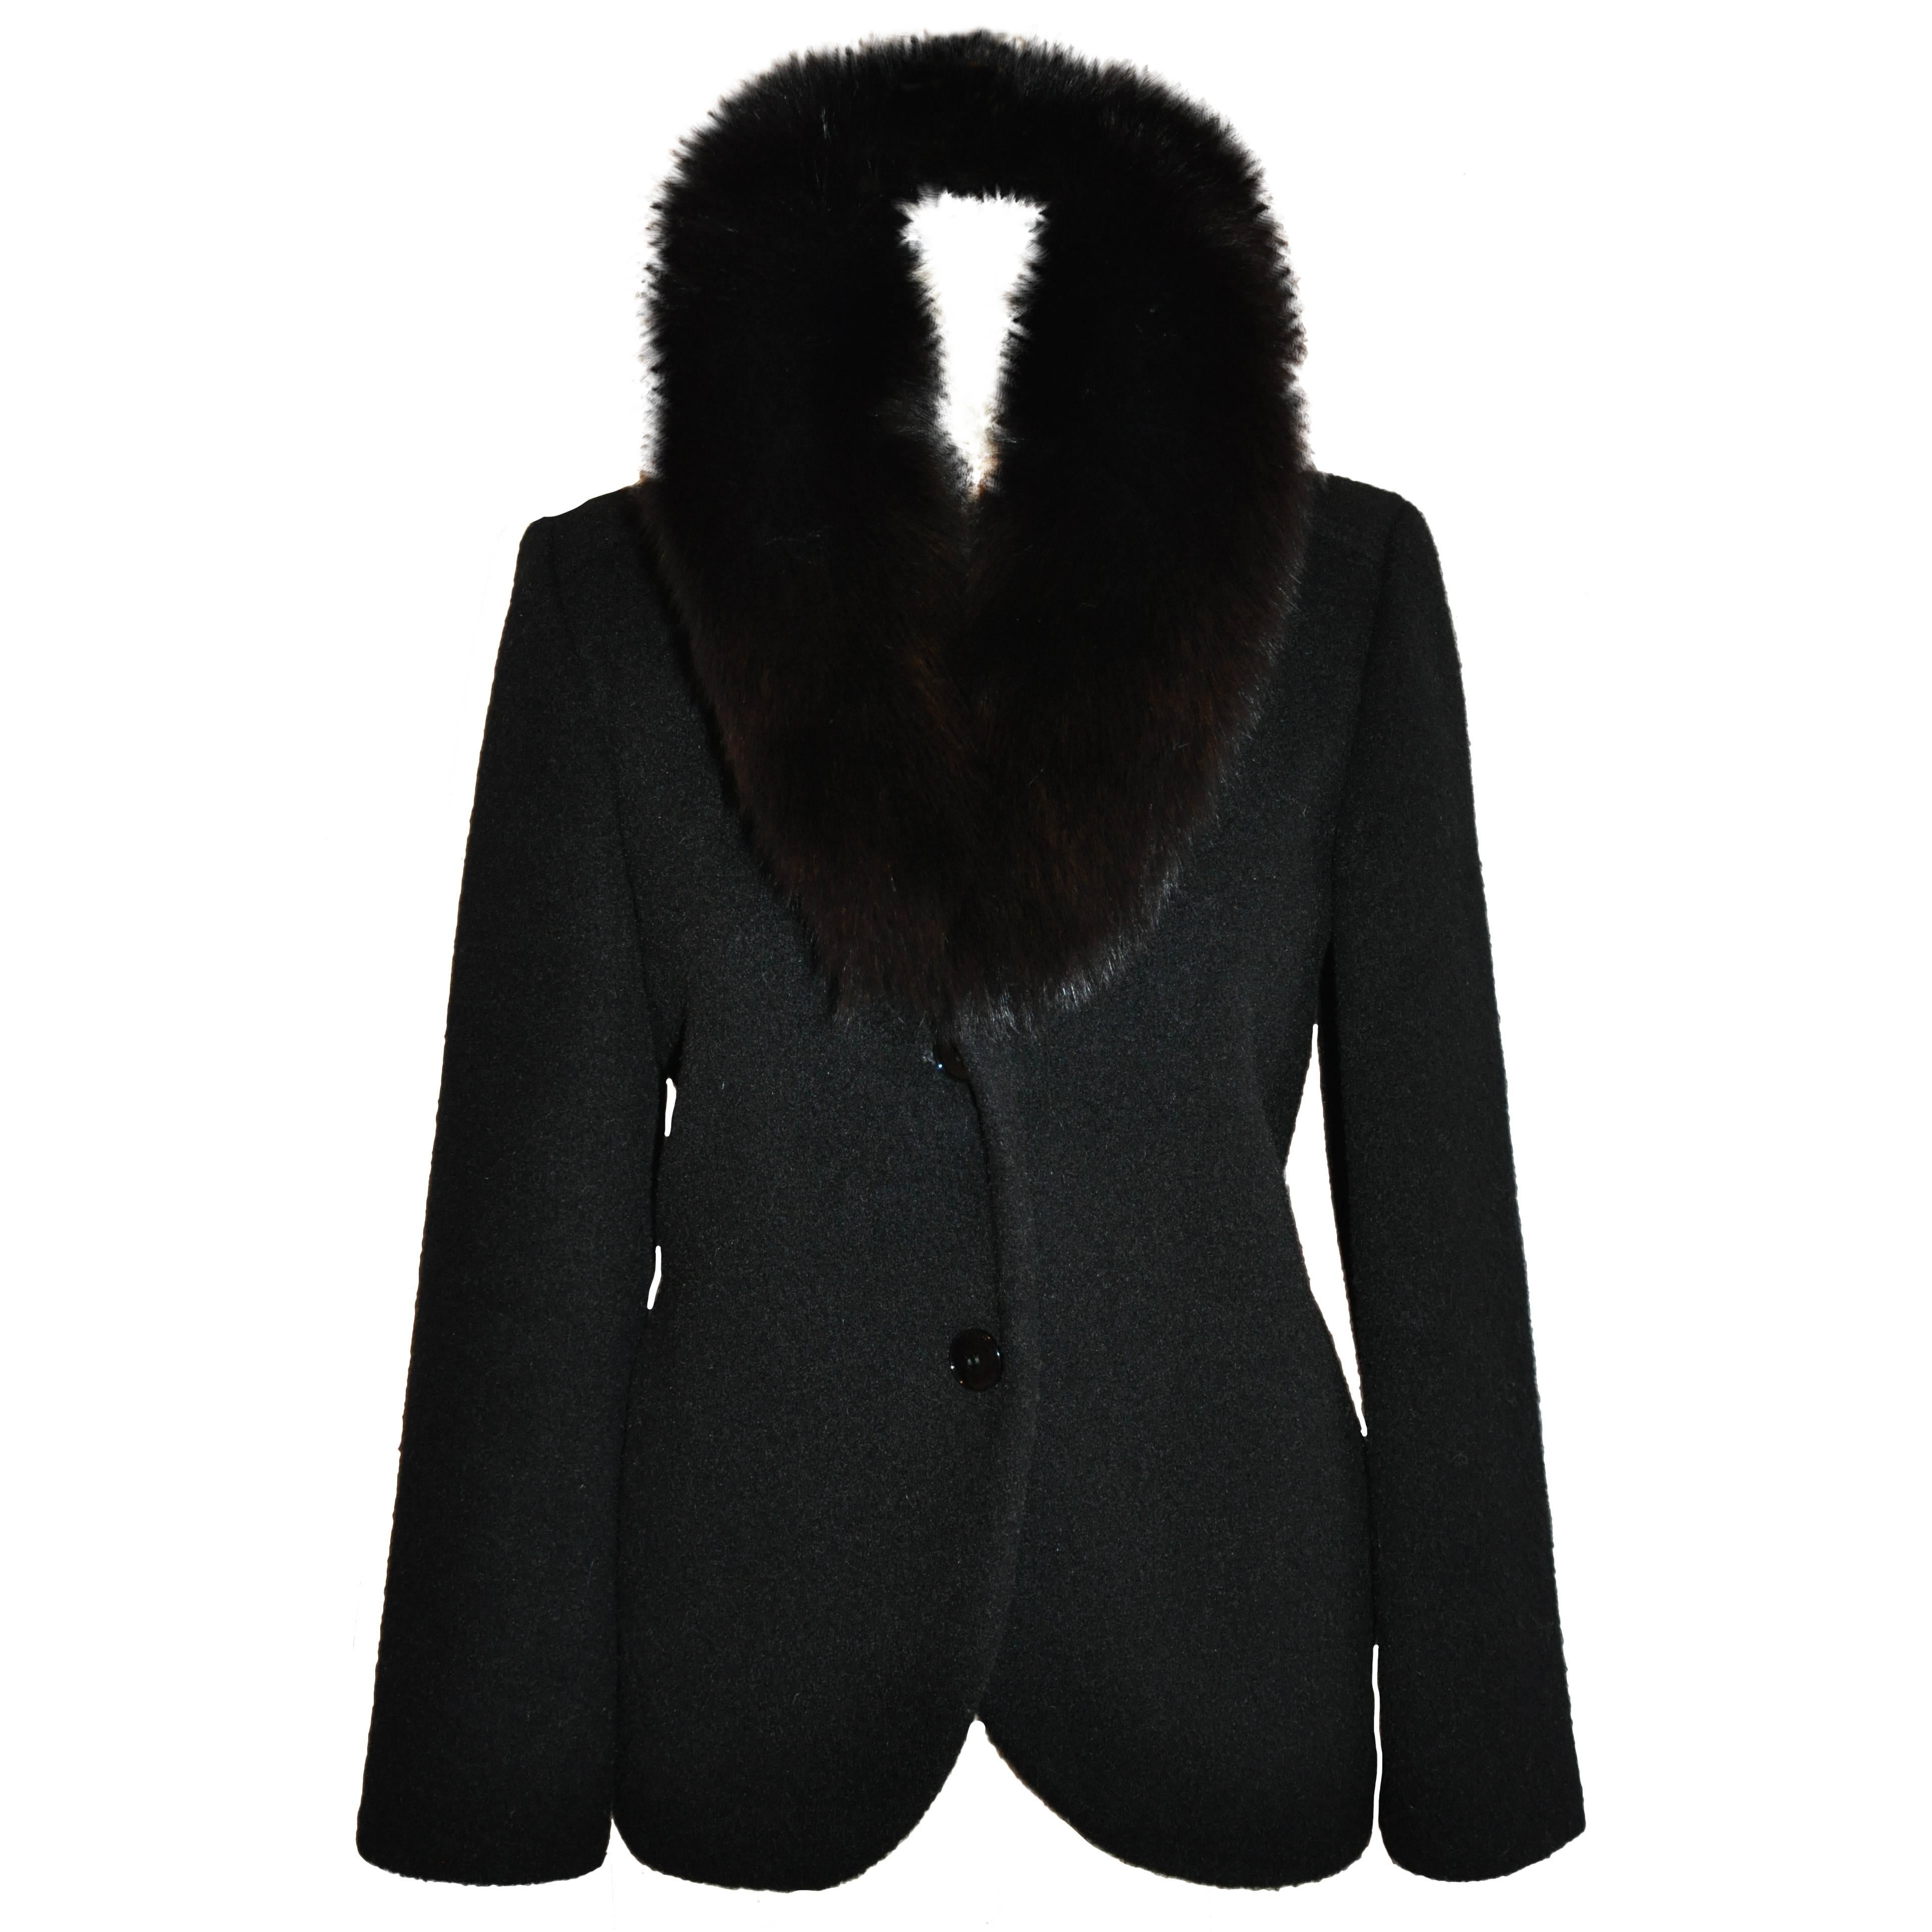 Pierre Cardin "Boutique" Black Wool Accented with Fox Collar Evening Jacket For Sale